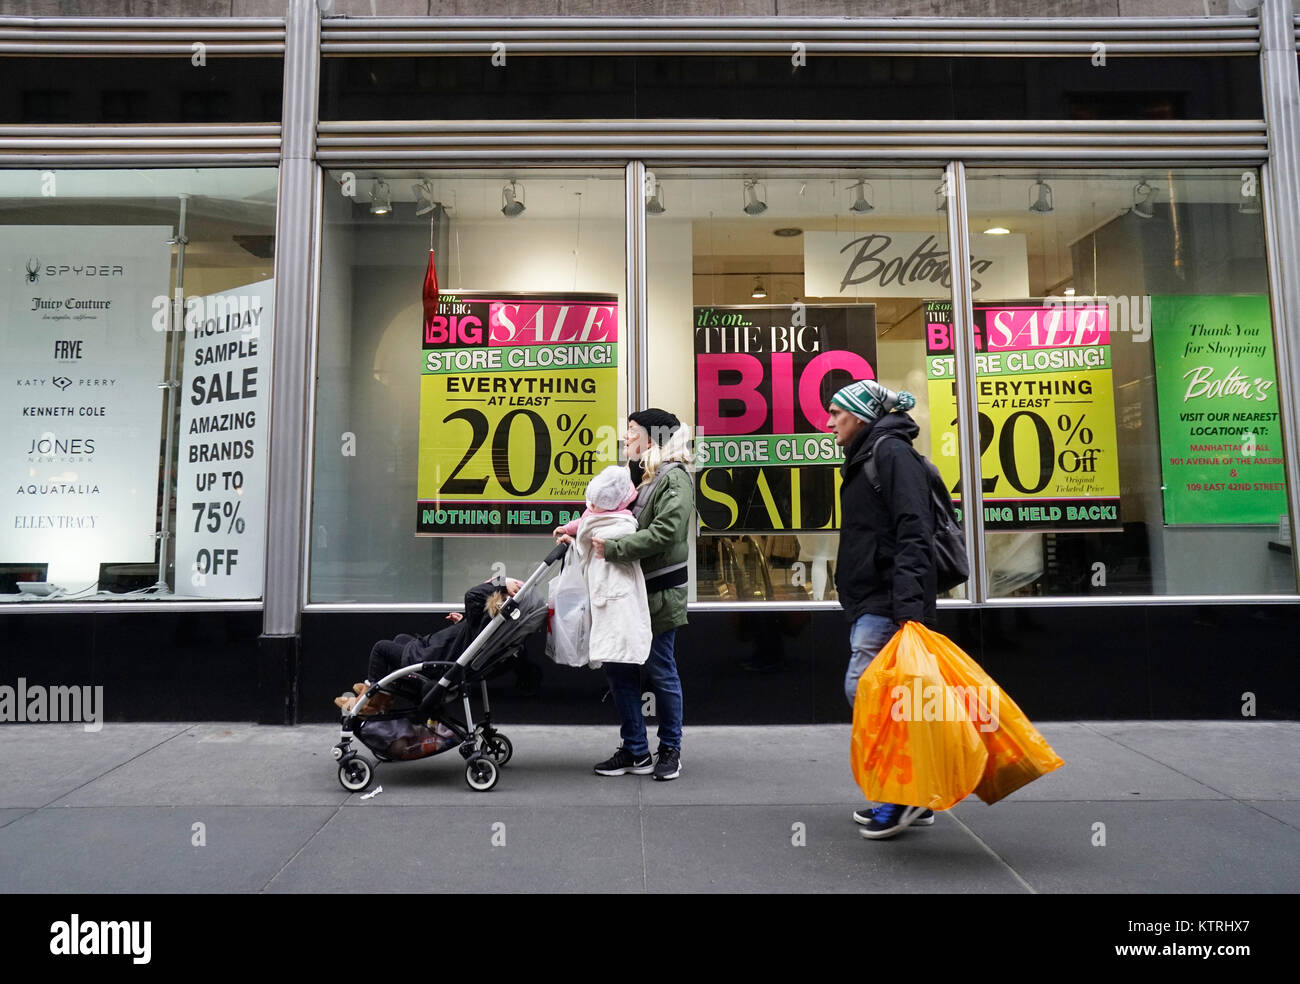 A Bolton's women's clothing store in the Herald Square neighborhood of New York announces that it is soon closing, offering discounts on merchandise, on Sunday, December 24, 2017. (© Richard B. Levine) Stock Photo